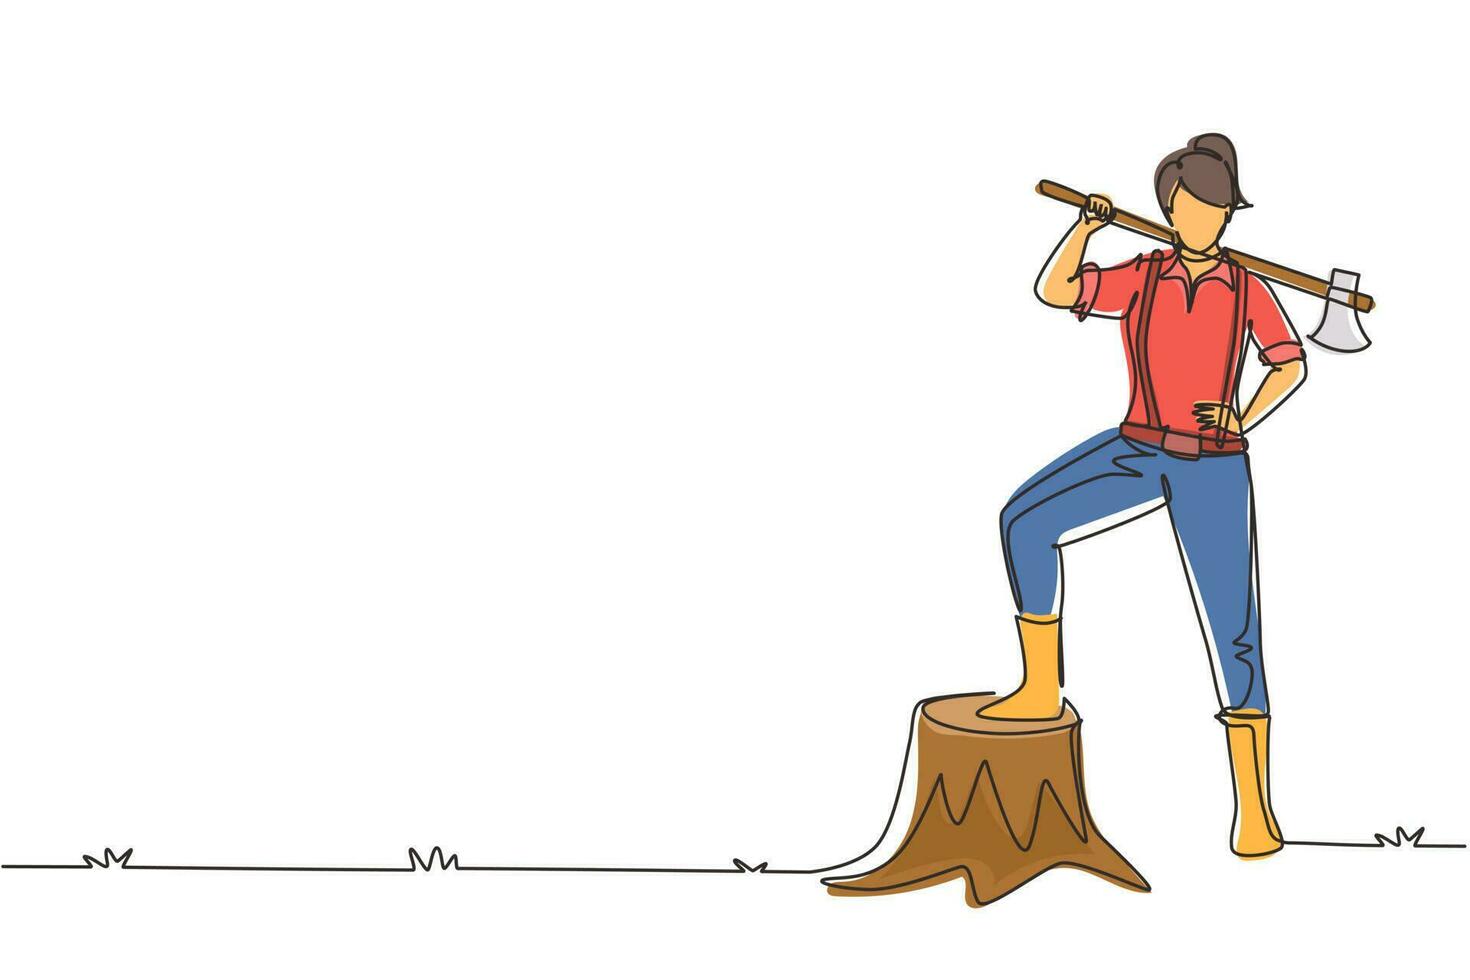 Single one line drawing pretty woman lumberjack wearing shirt, jeans, boots. Holding on her shoulder a ax posing with one foot on a tree stump. Continuous line draw design graphic vector illustration